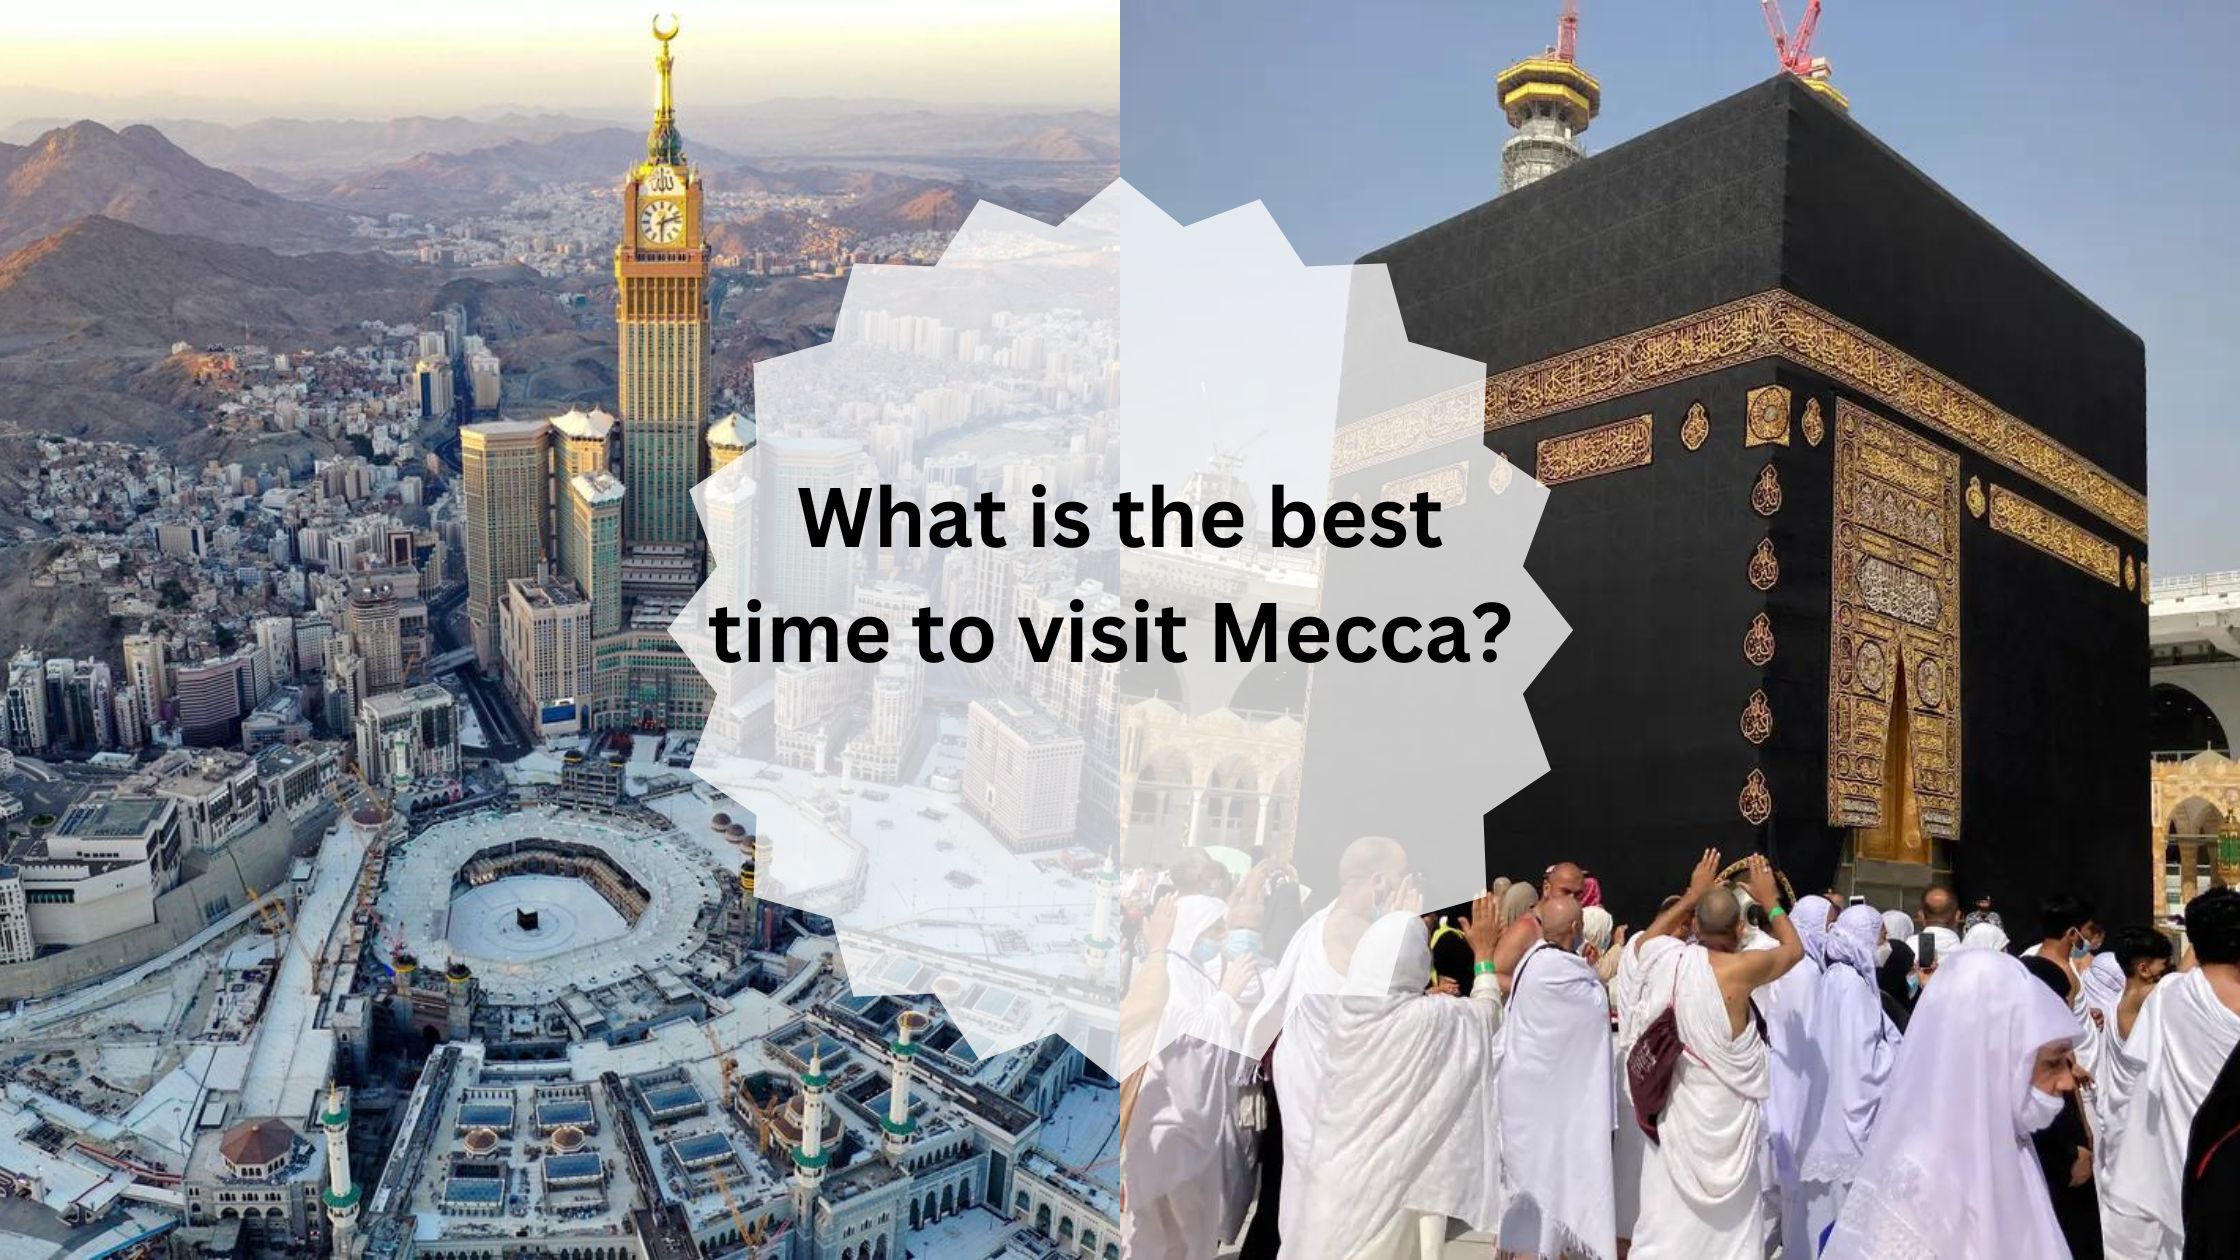 What is the best time to visit Mecca?